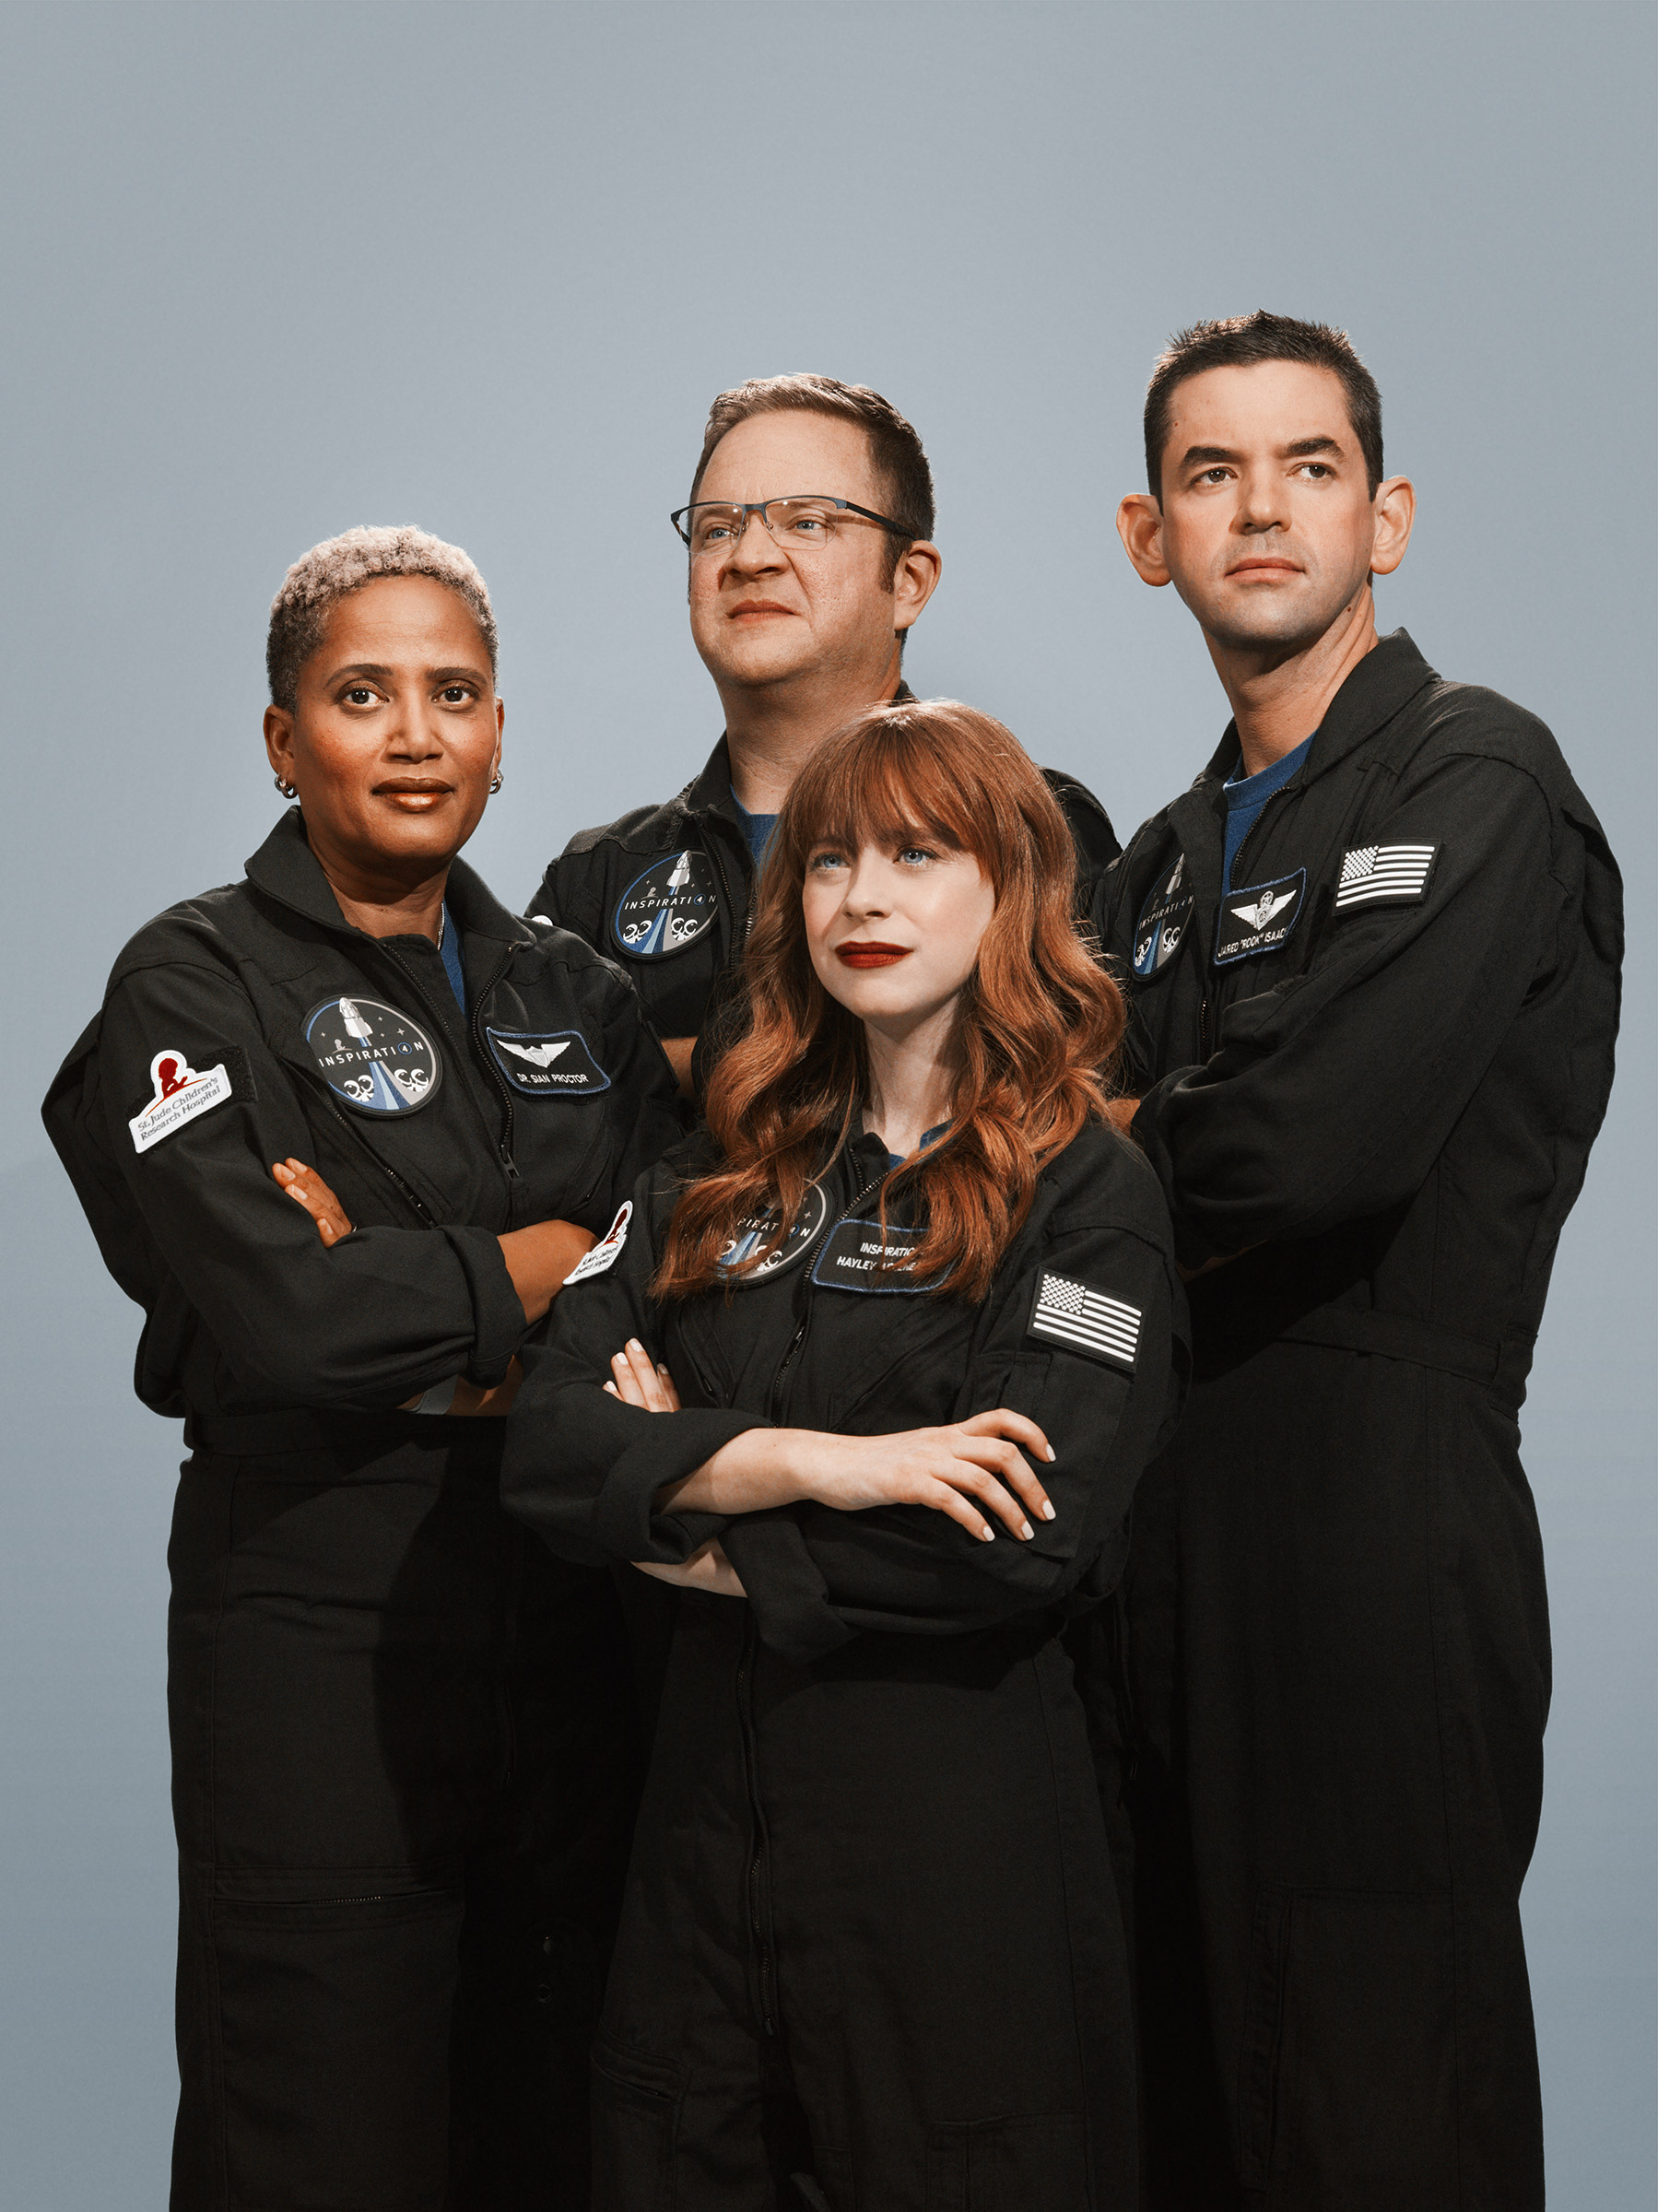 The crew of the Inspiration4, the world’s first all-civilian mission to orbit. From left: Dr. Sian Proctor, Chris Sembroski, Hayley Arceneaux, and Jared Isaacman photographed in Los Angeles, July 2021. (Philip Montgomery for TIME)